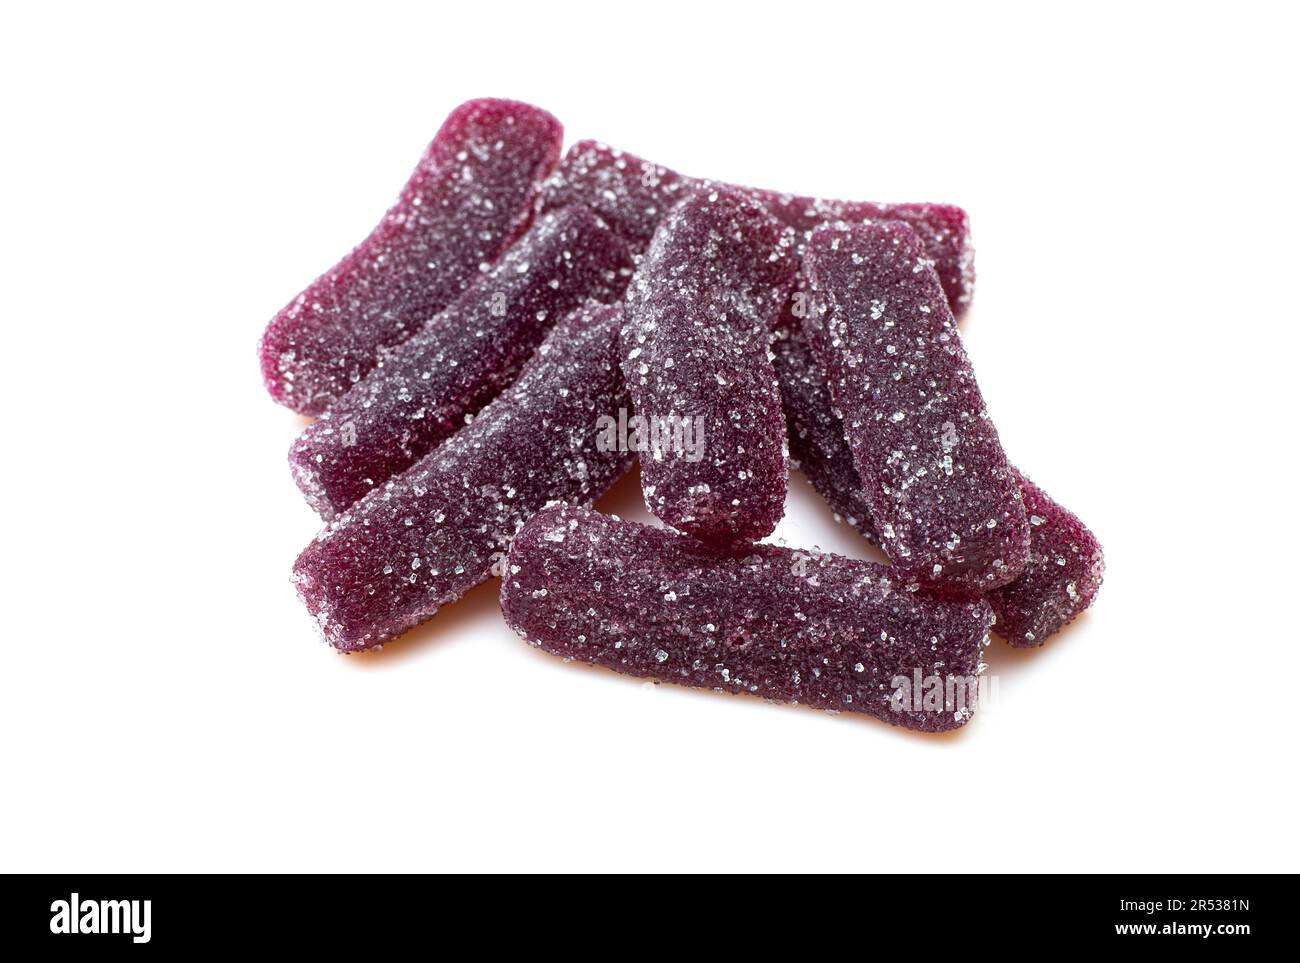 Pile of purple sugary jelly candies isolated on white background. Gummy worms treat Stock Photo